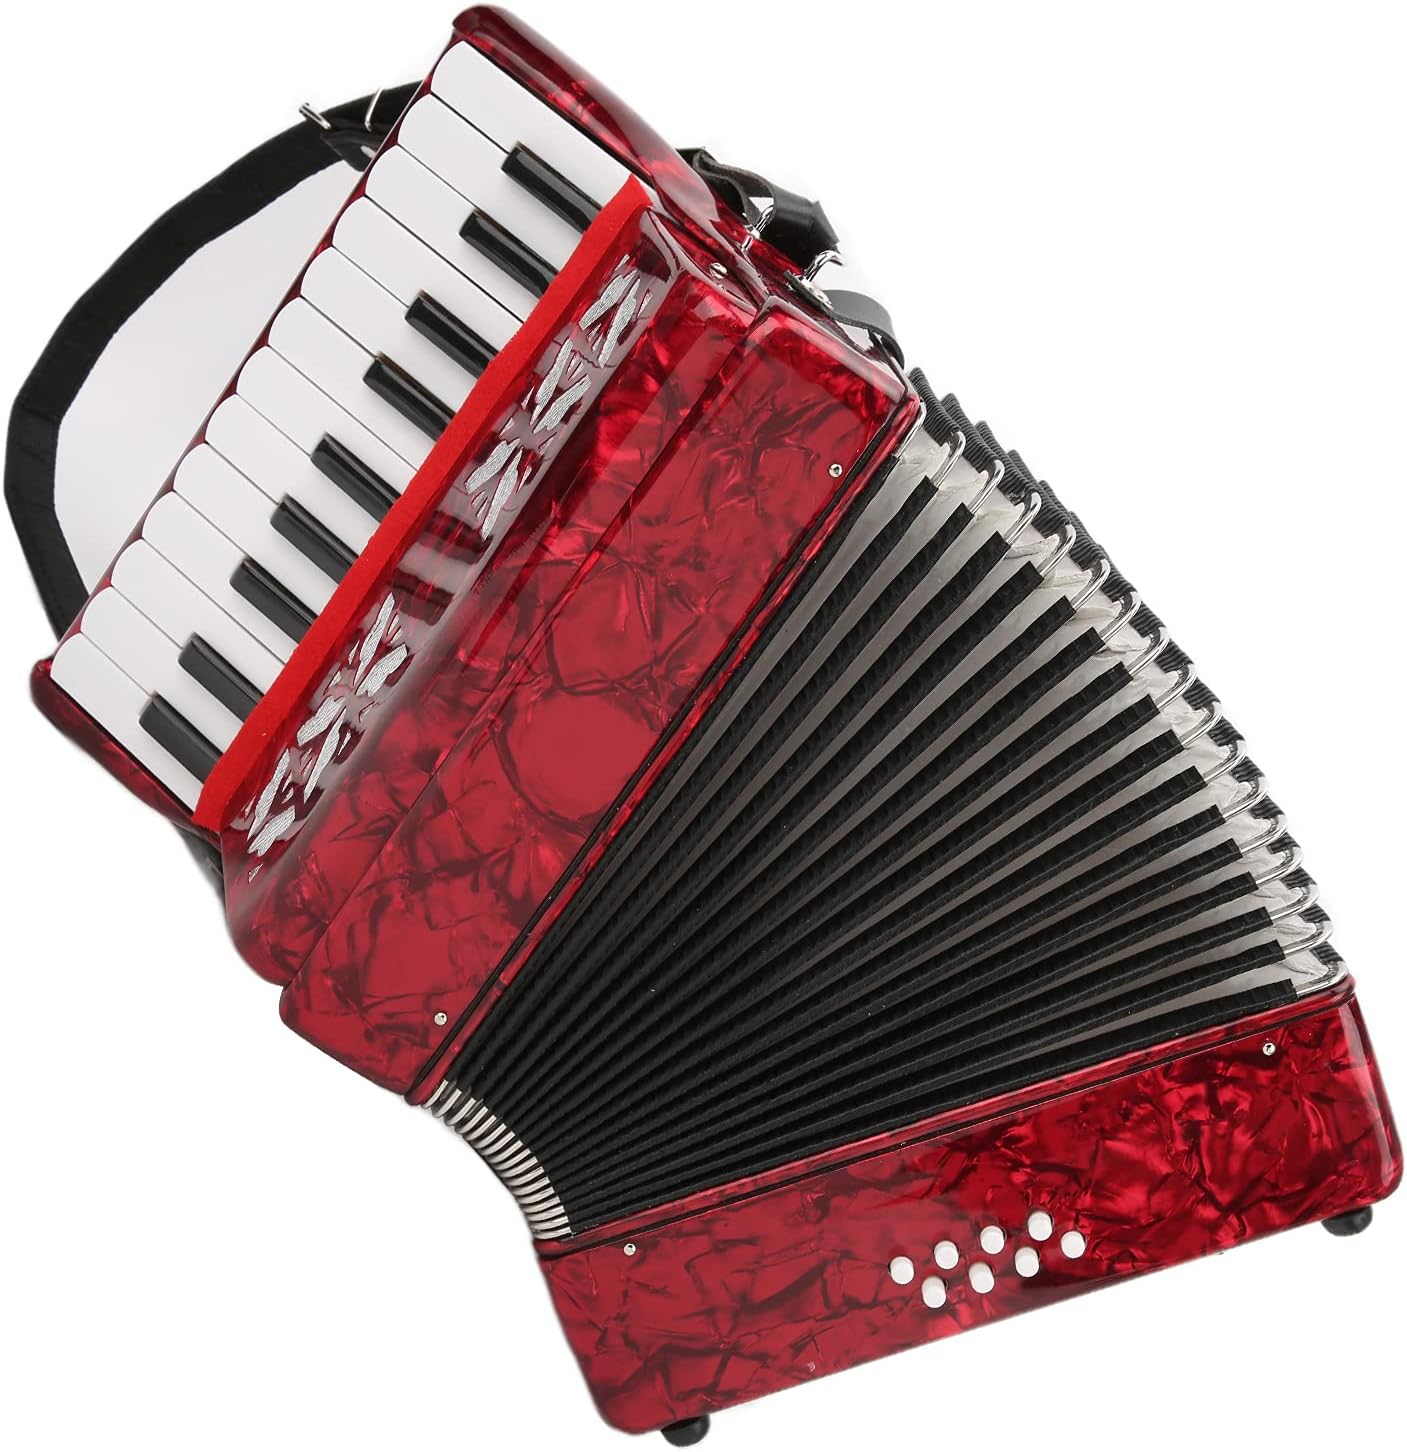 Button Accordion 17 Keys with 8 Bass Diatonic for Solo and Ensemble Kid and Beginner Friendly